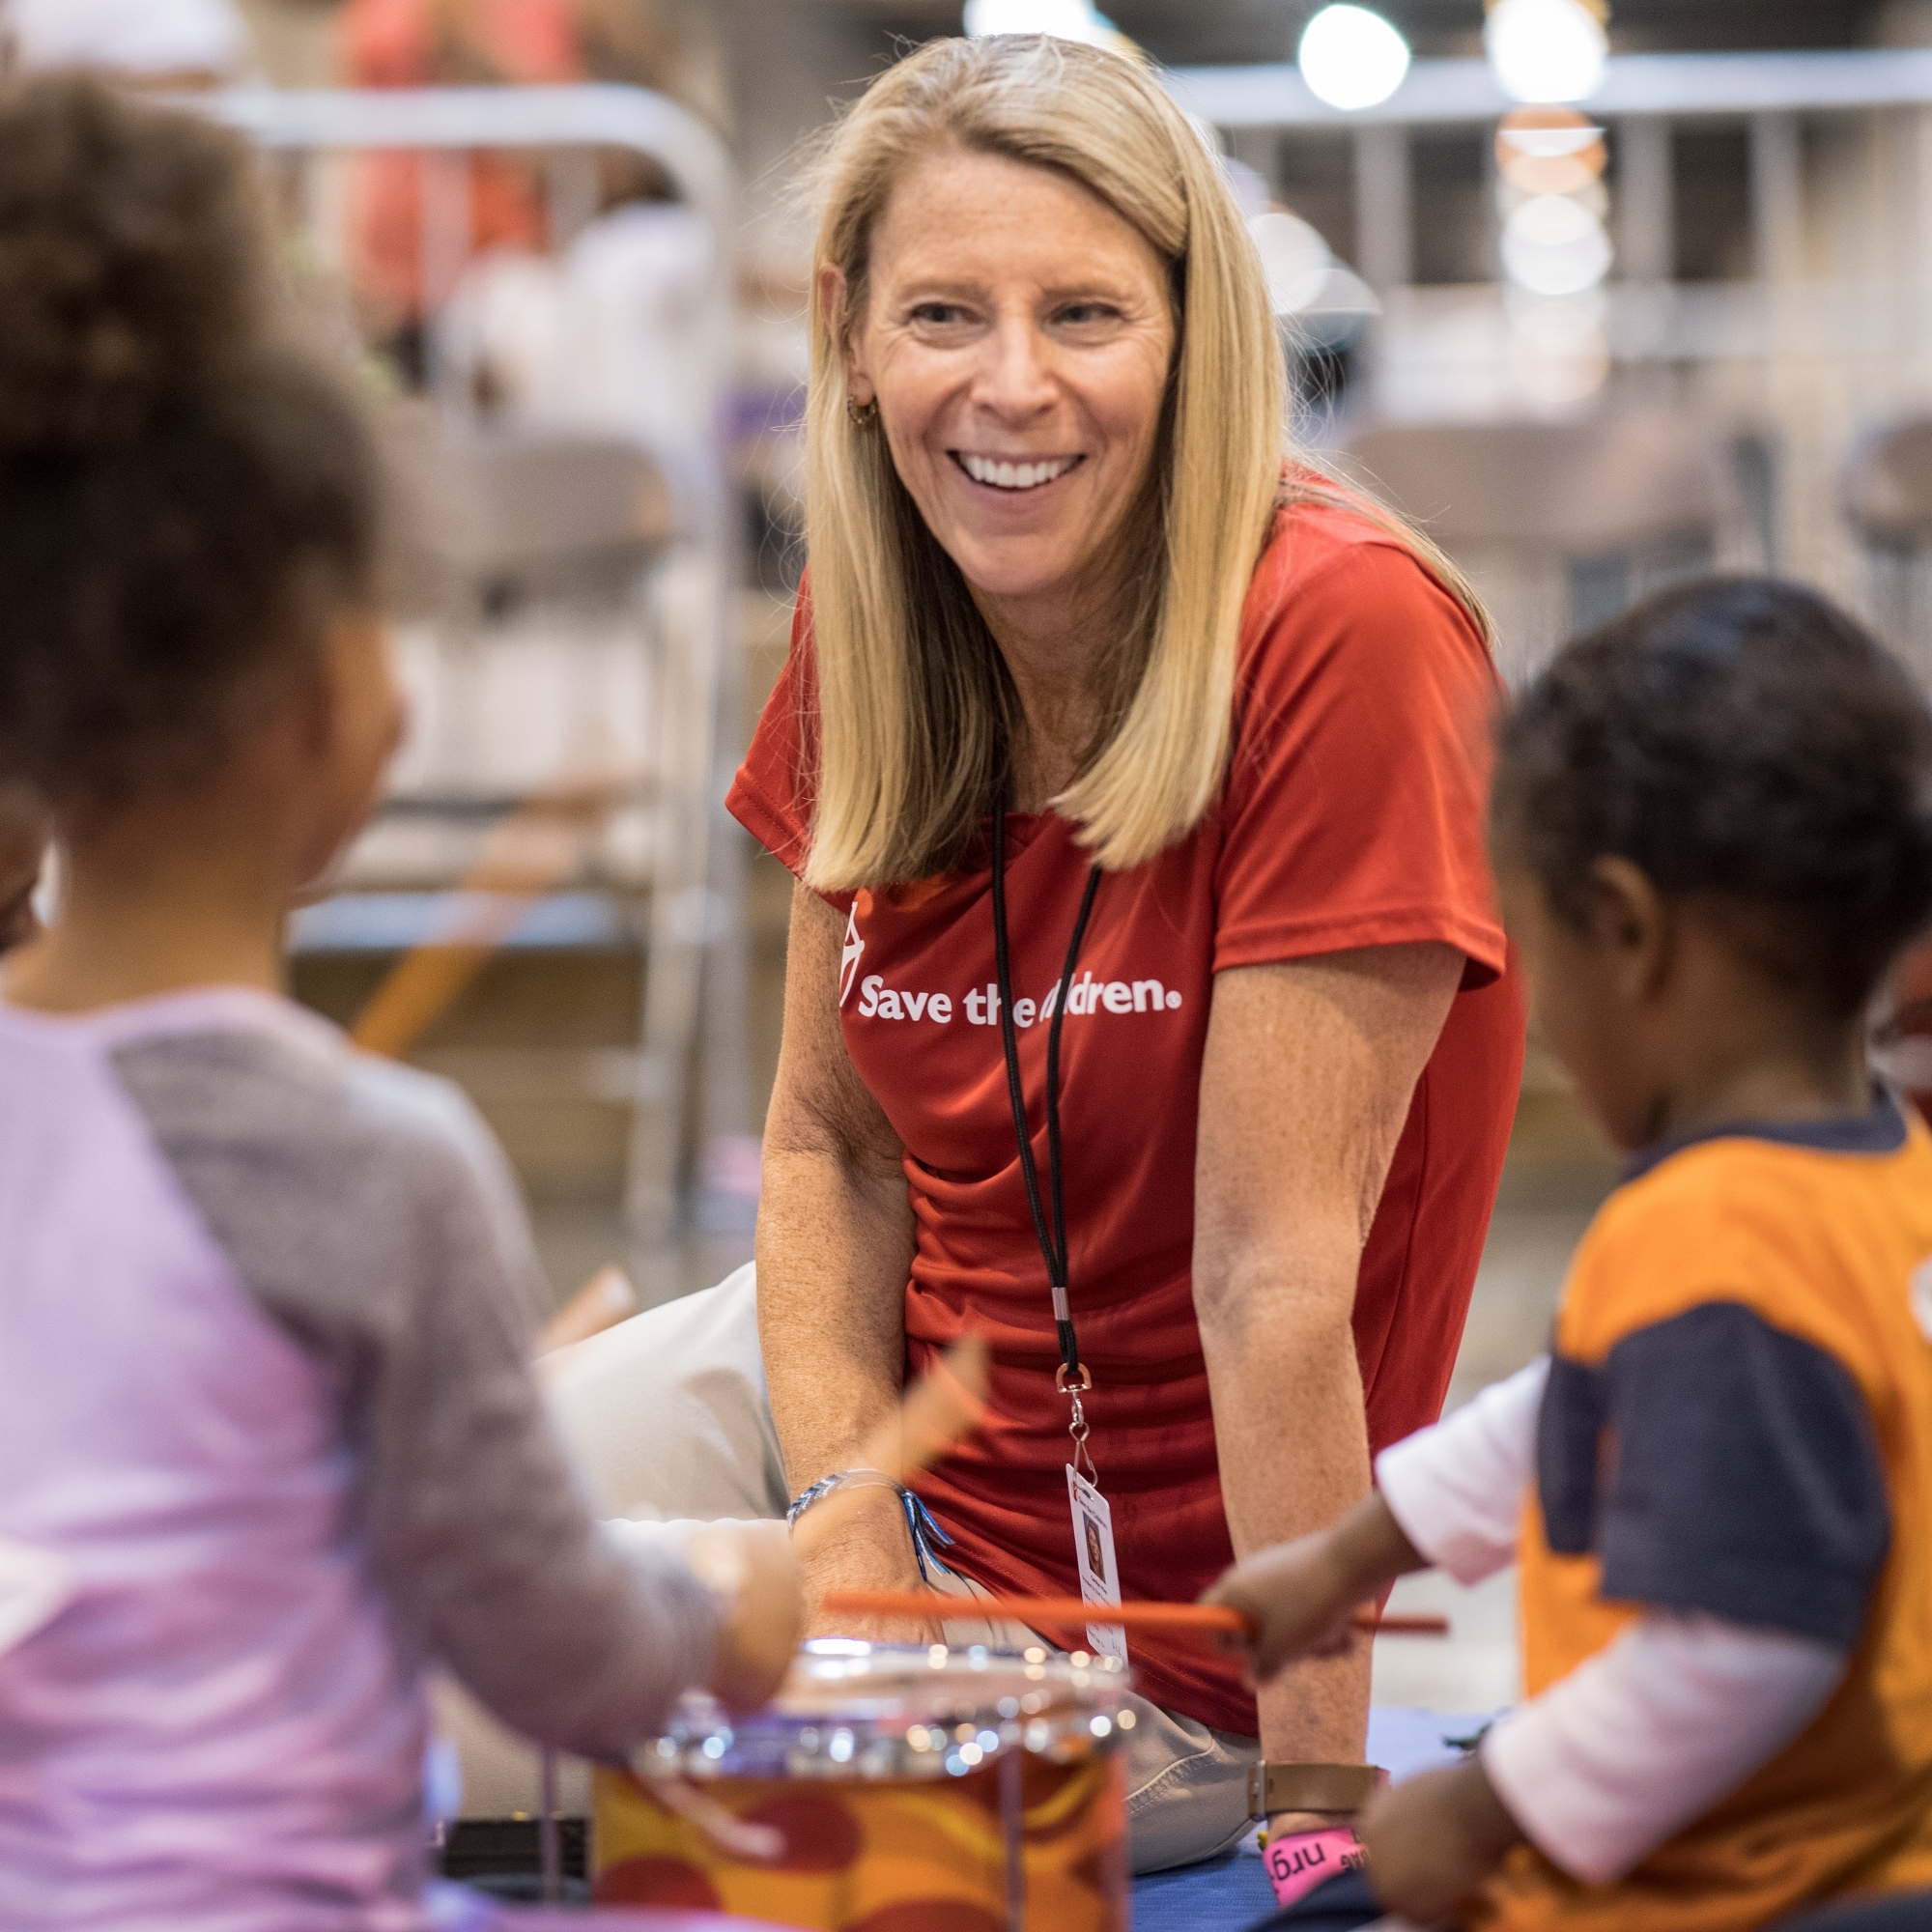 Carolyn Miles, president & CEO of Save the Children meets with children in a mega-shelter in Houston, Texas.  Photo Credit Susan Warner/Save the Children 2017.